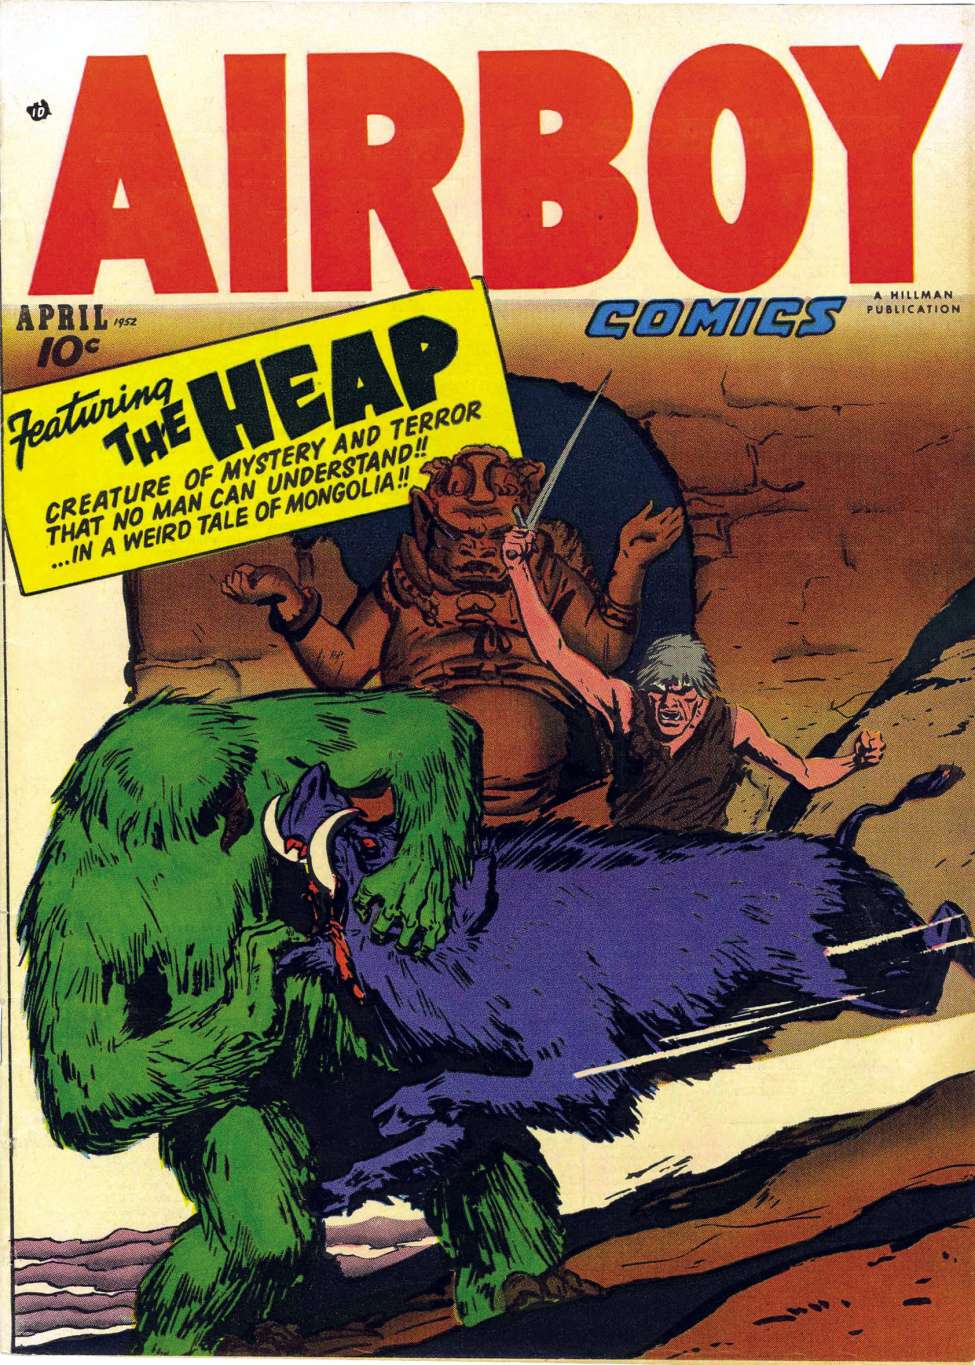 Comic Book Cover For Airboy Comics v9 3